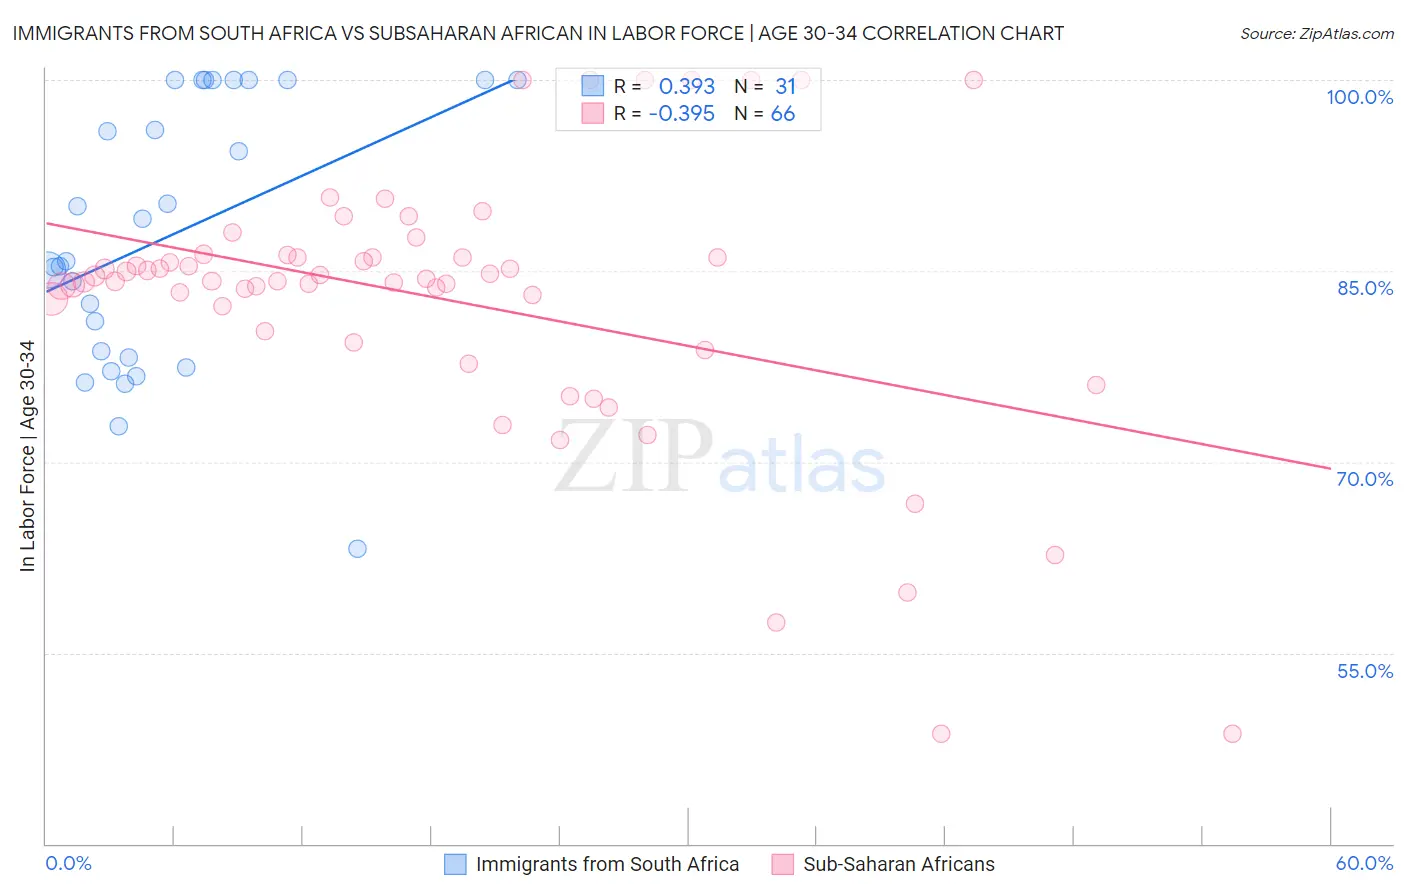 Immigrants from South Africa vs Subsaharan African In Labor Force | Age 30-34